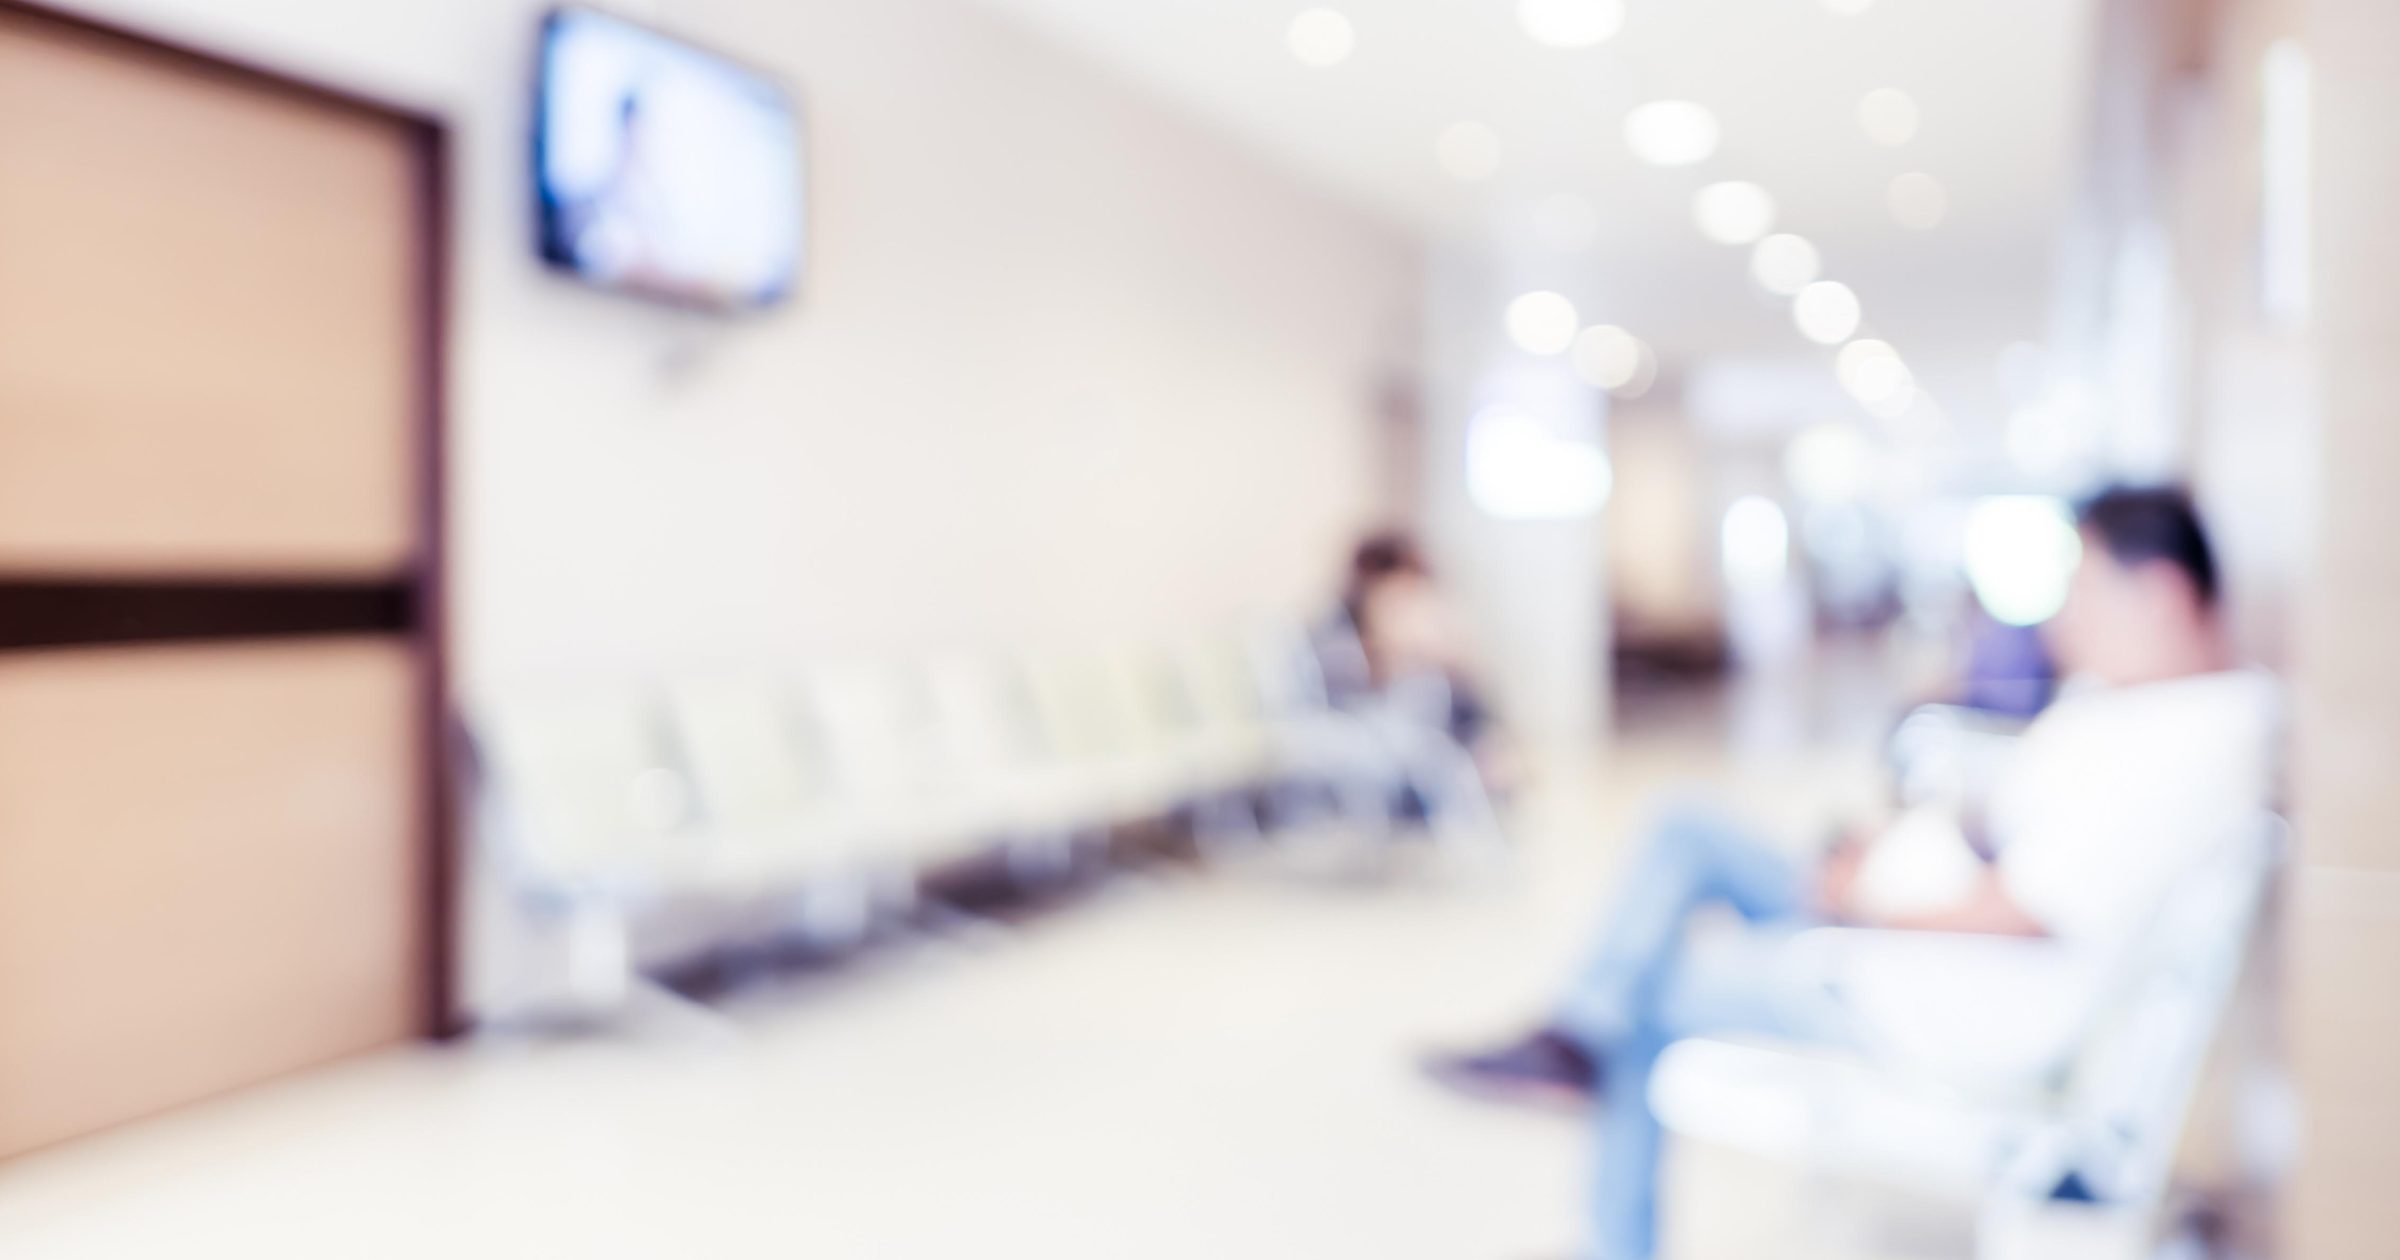 Blurred patient waiting for see doctor,abstract background